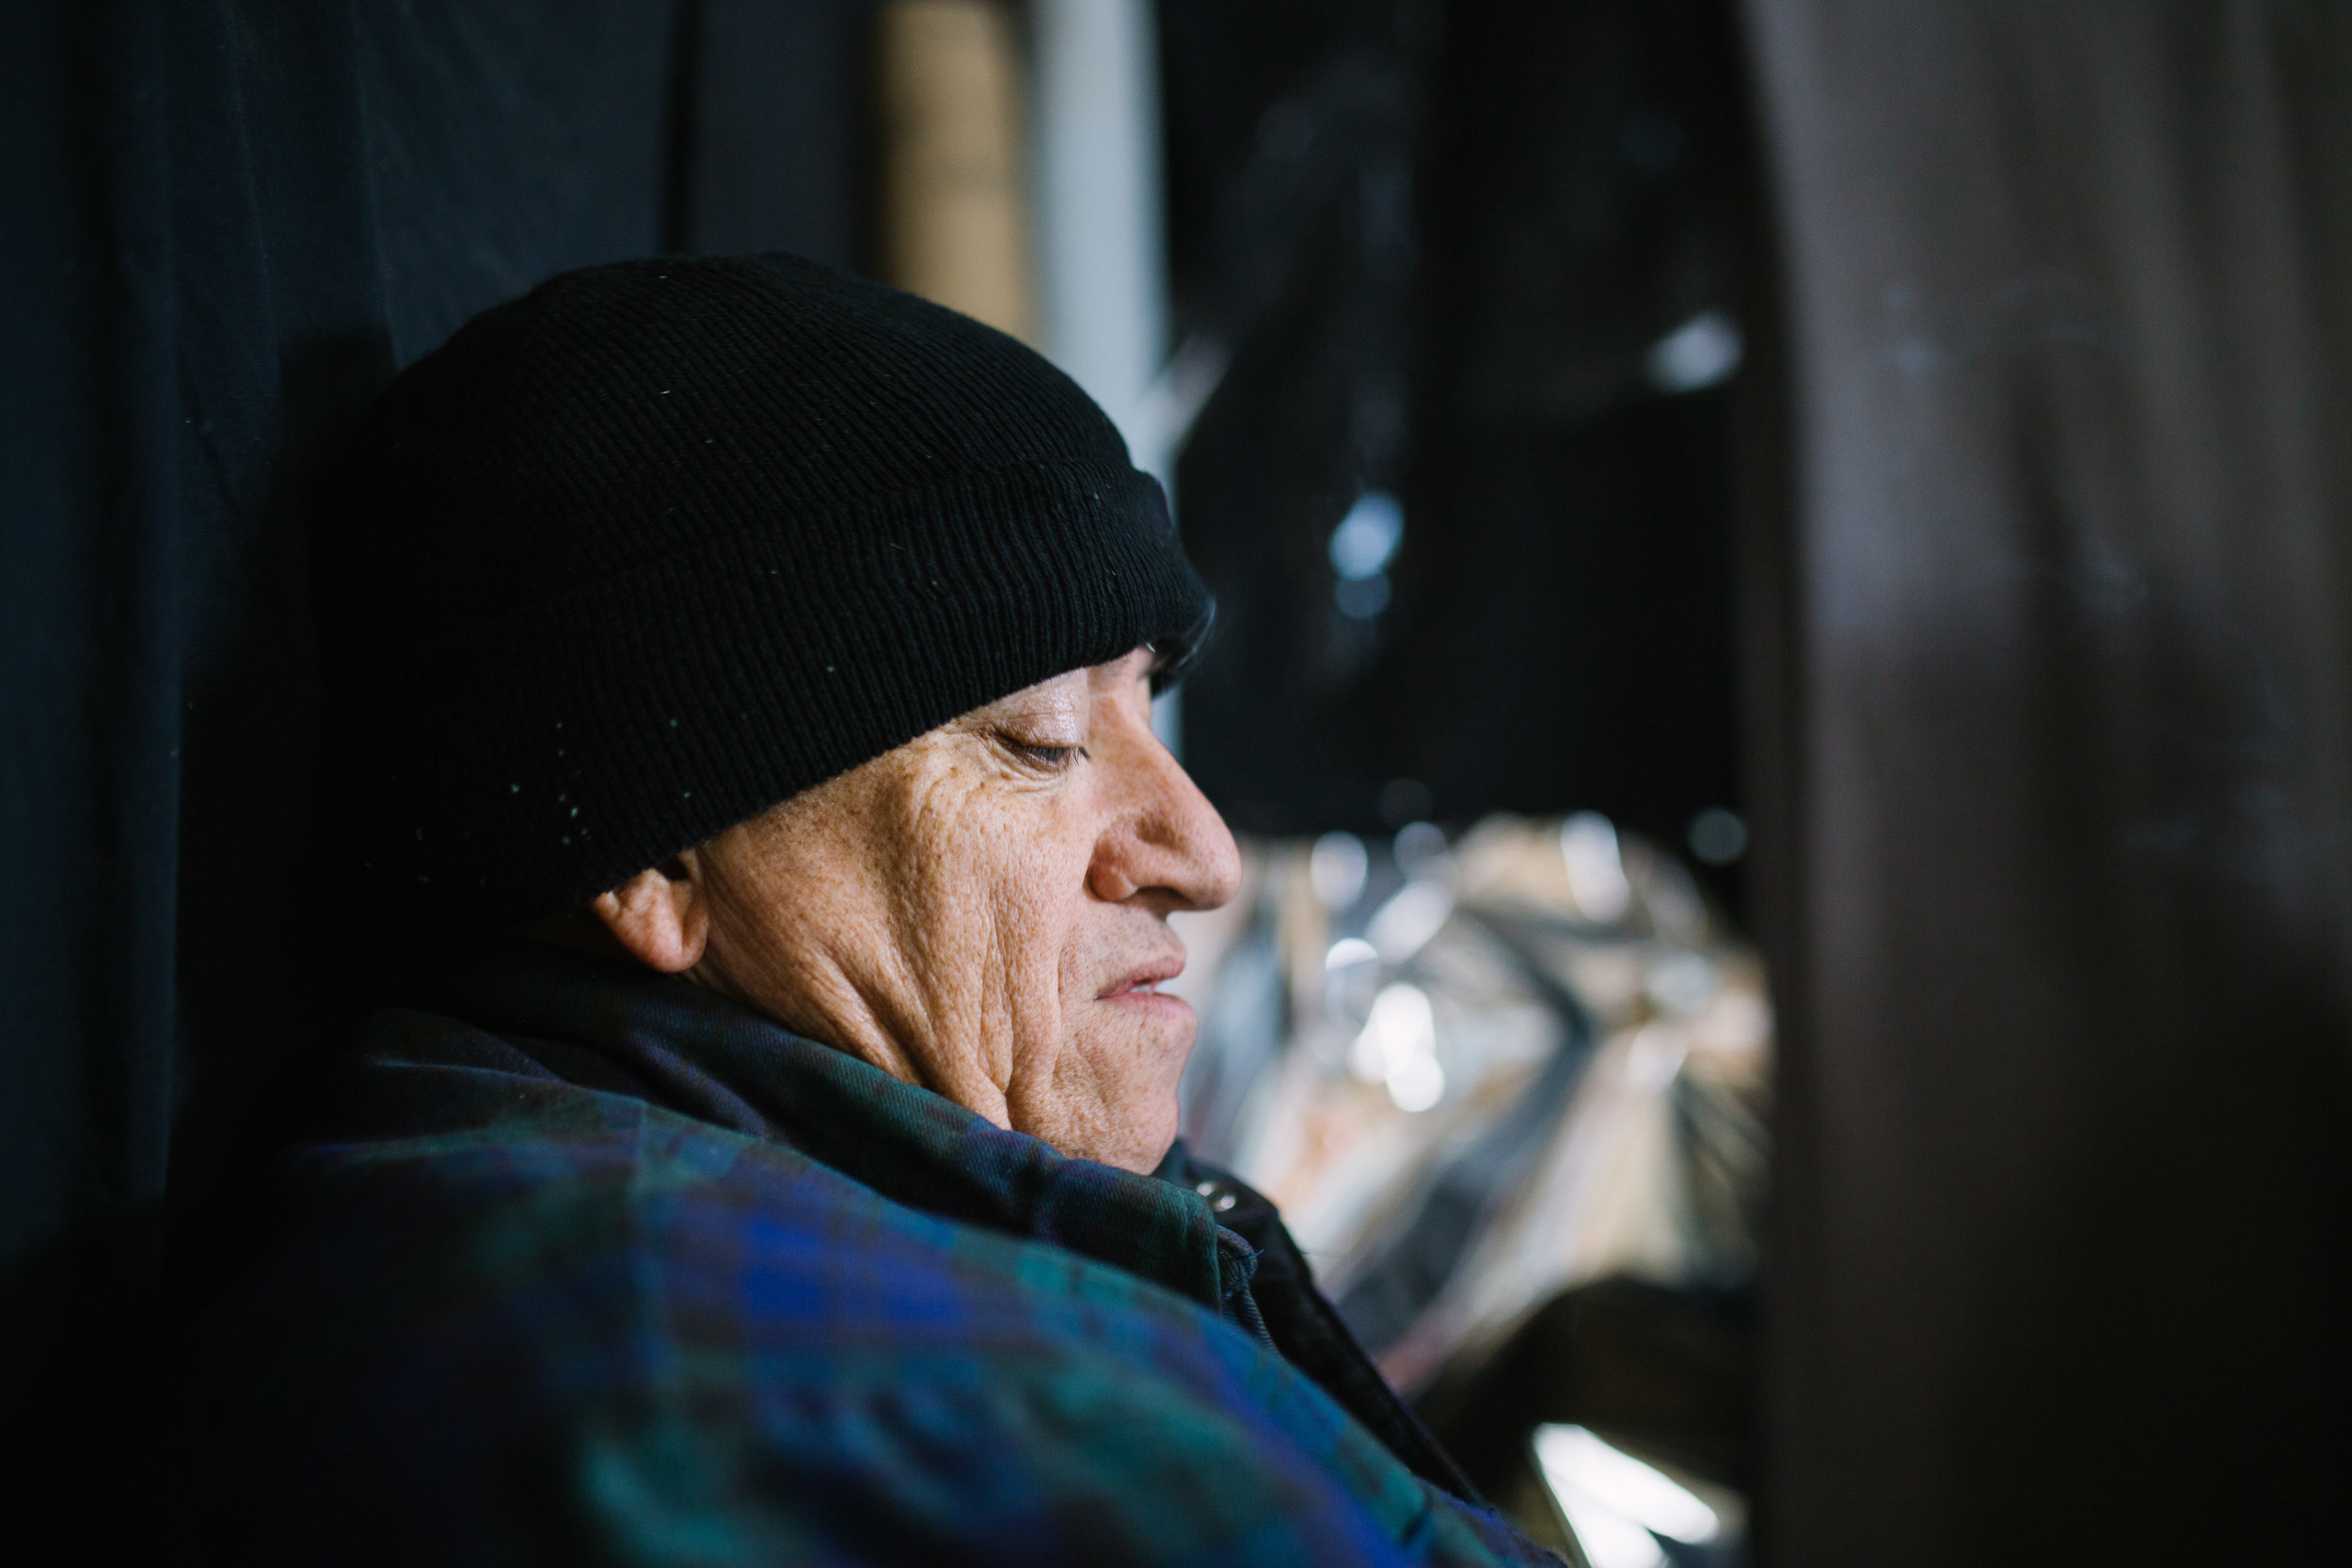  December 24 2017.  My father sitting next to me in his shed in Peterborough, Canada talking about the past few weeks and months in which he has struggled with his mental health and day-to-day life. My younger brother sat across from us listening. 